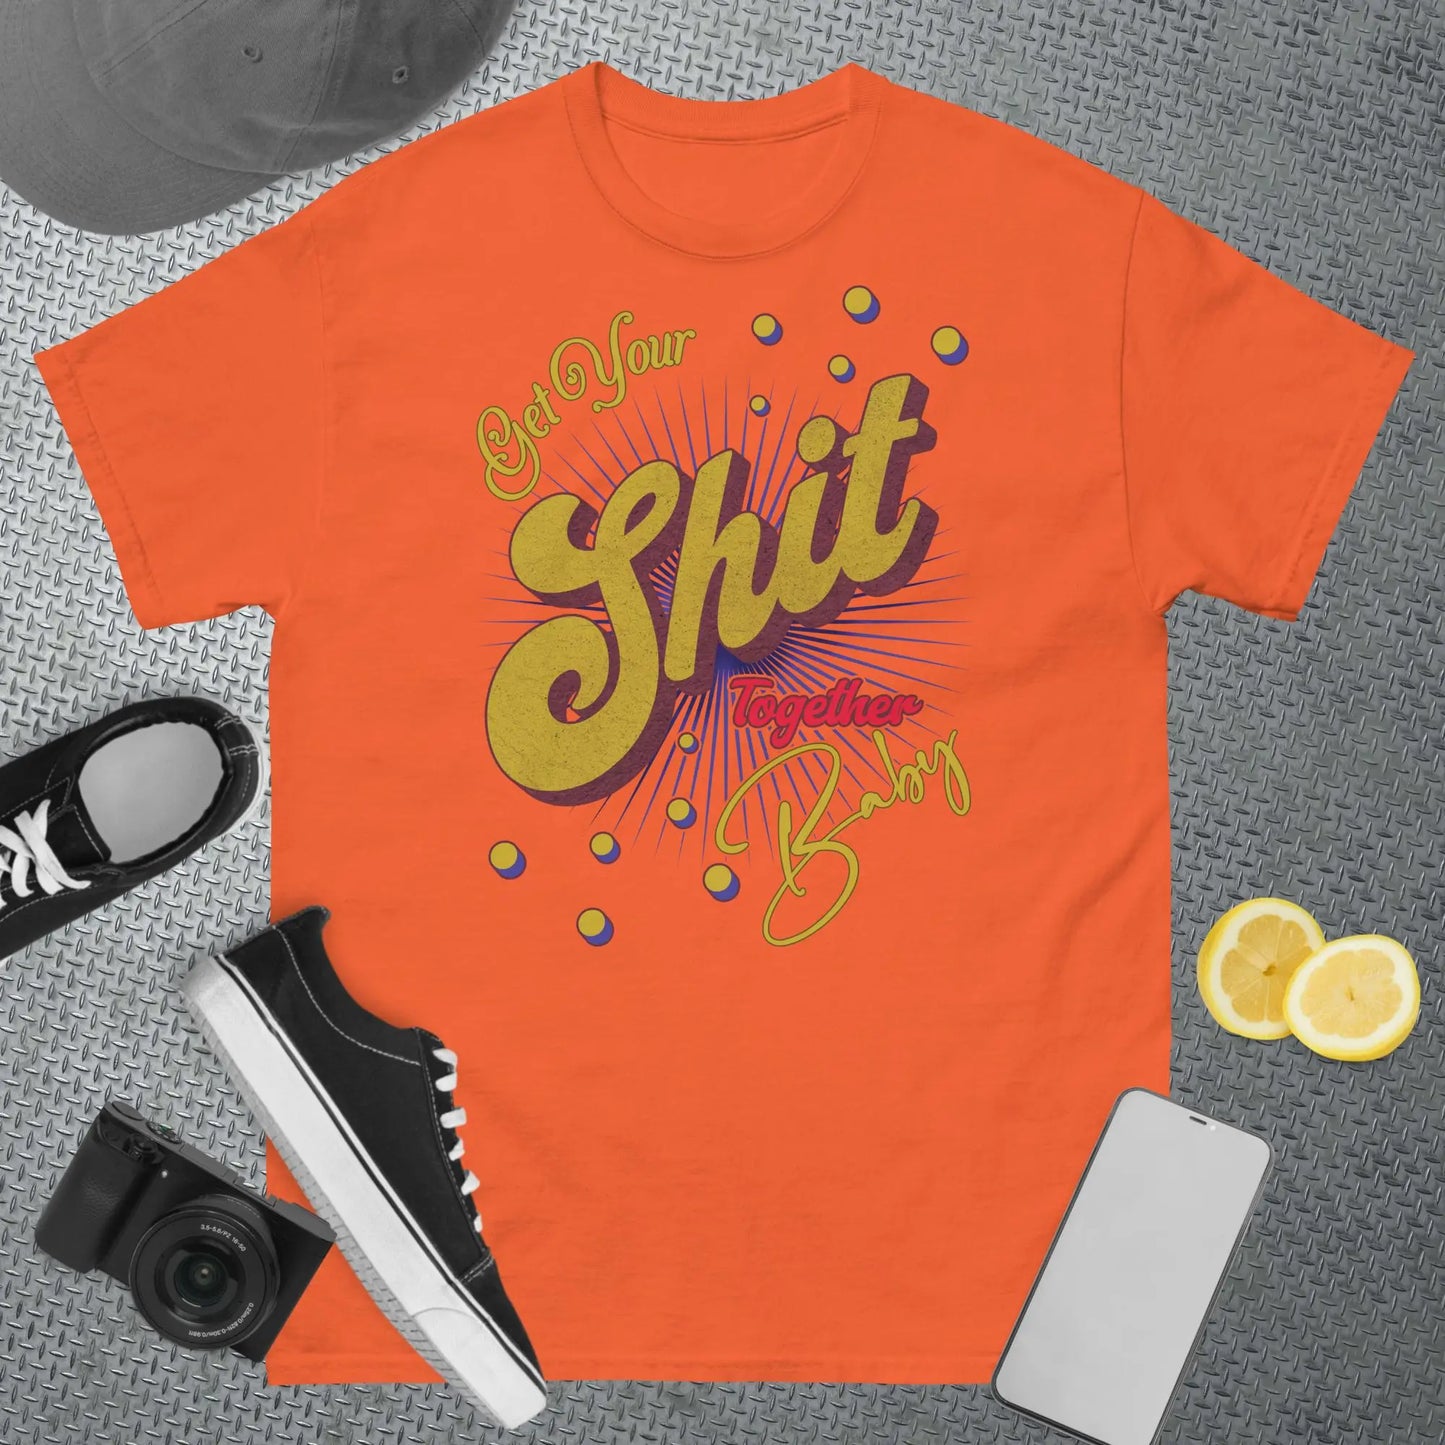 Get Your Shit Together Men's Classic t-shirt by BC Ink Works - BC Ink Works